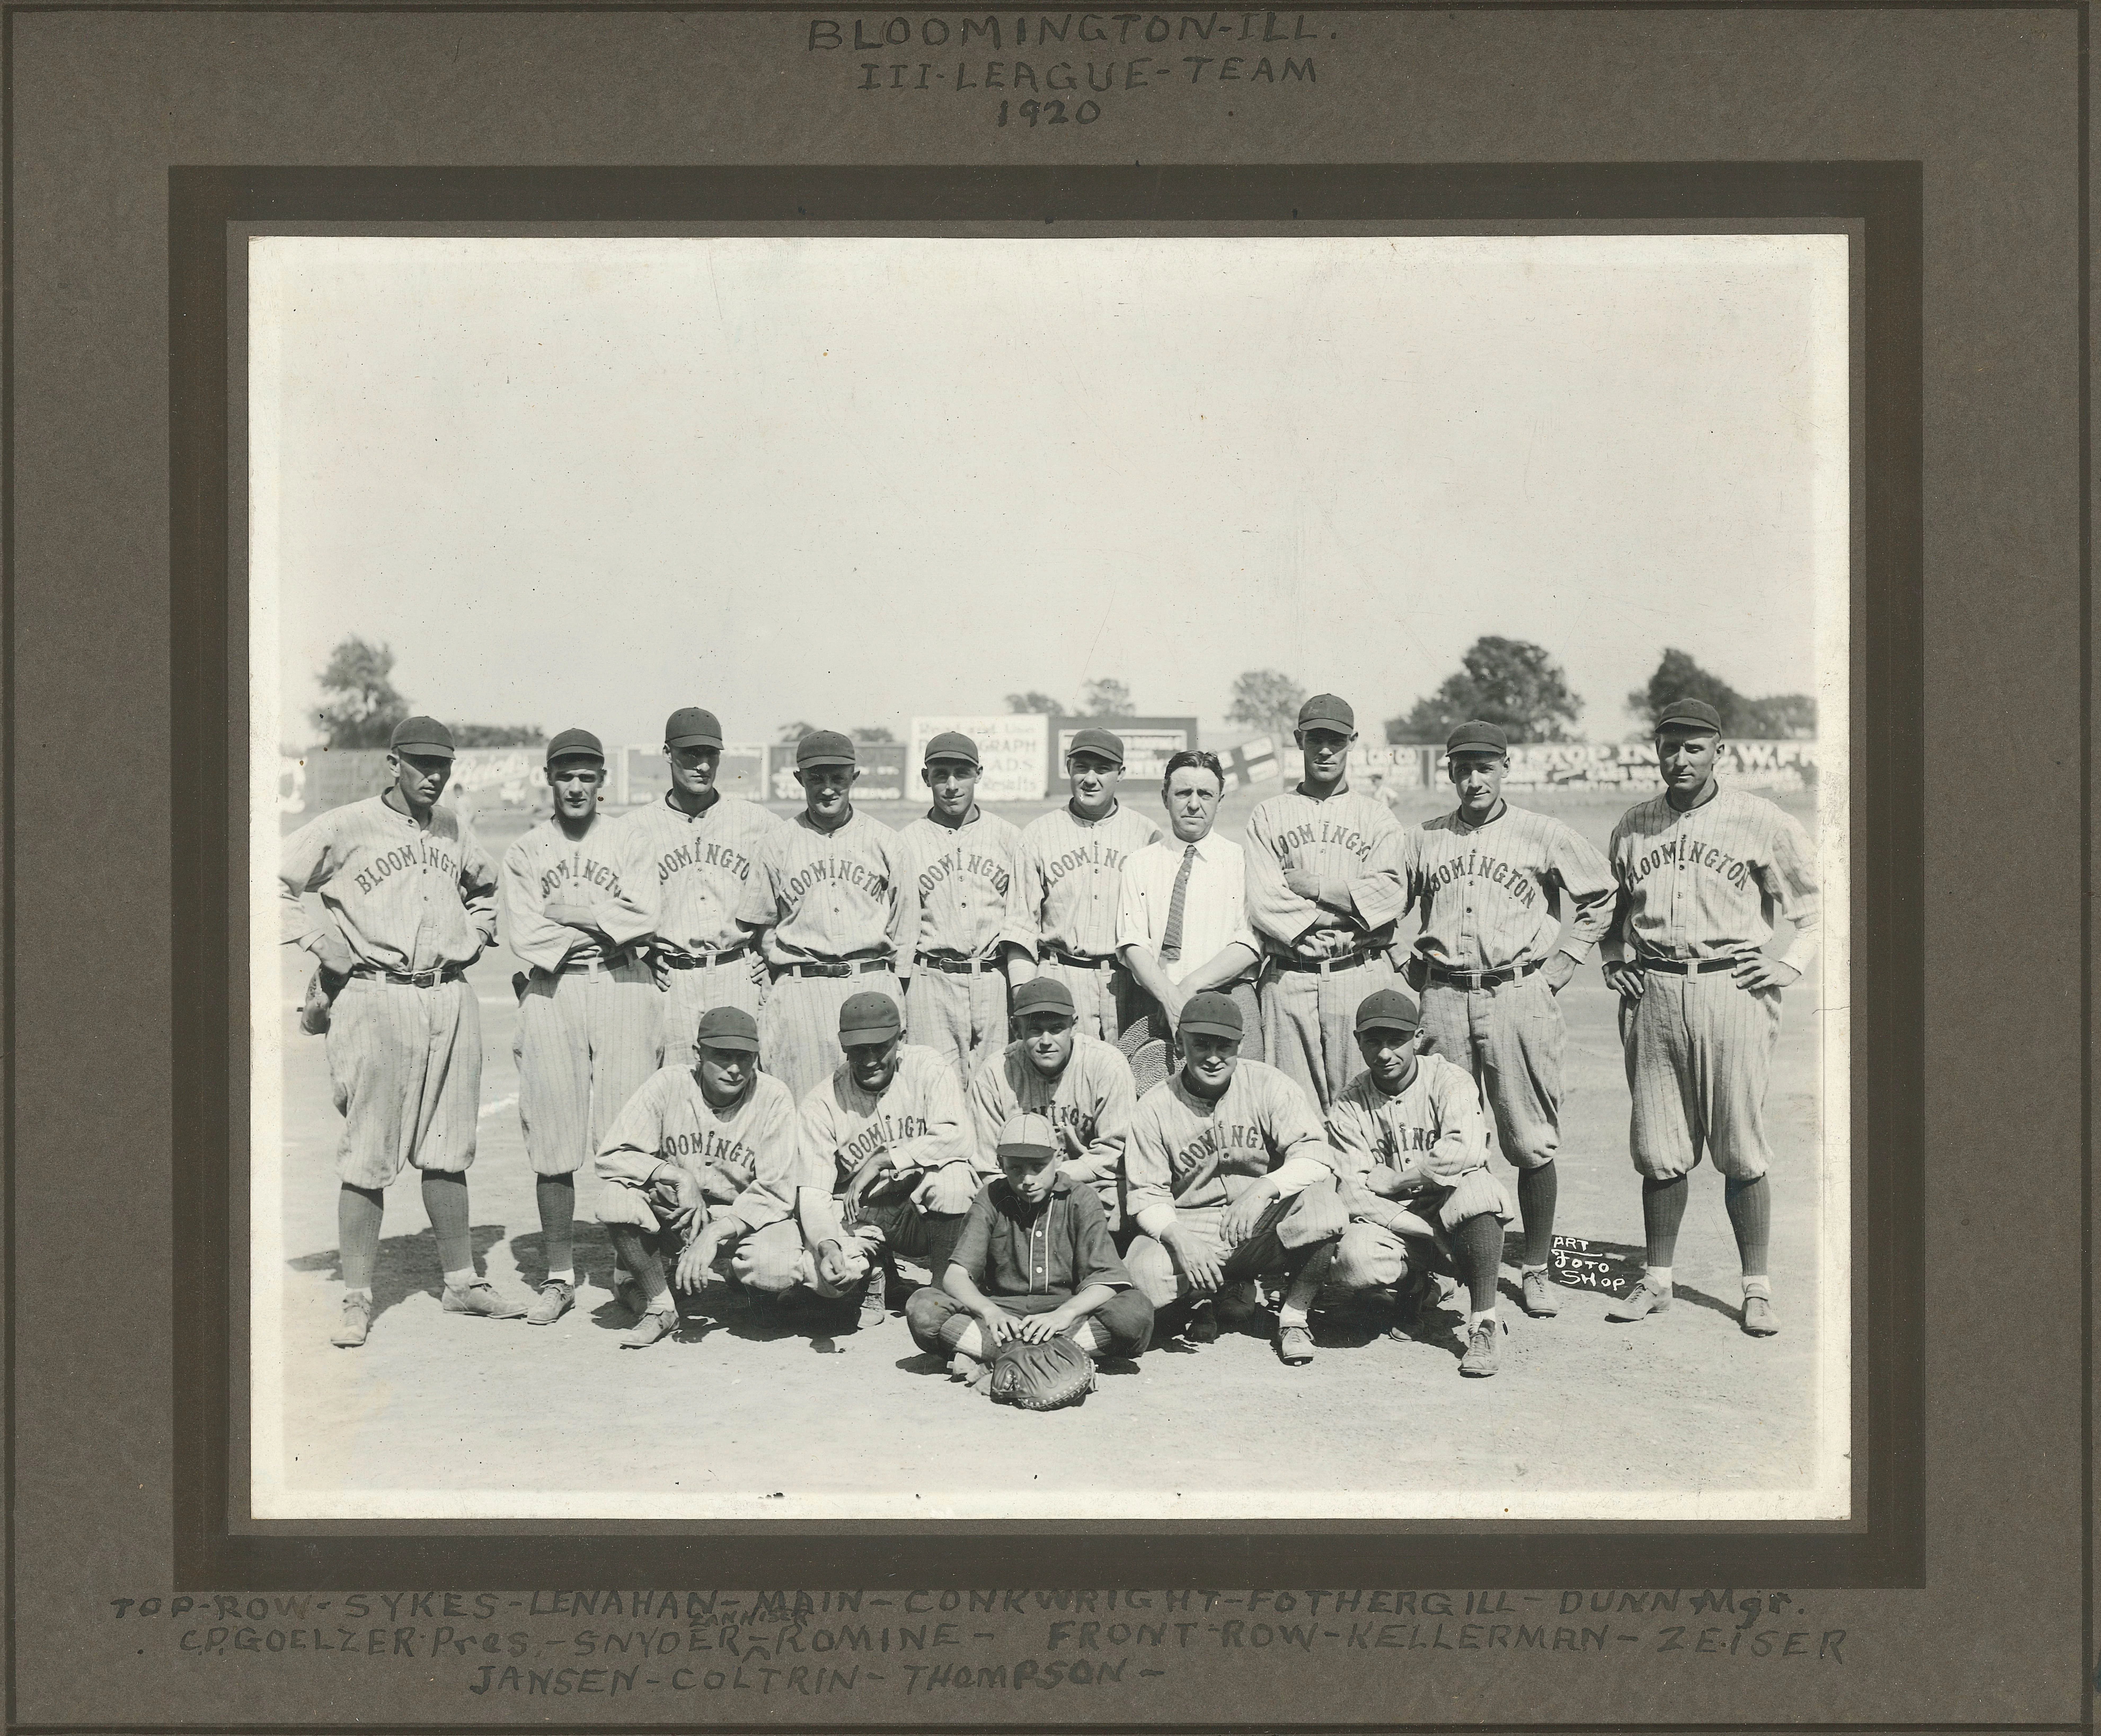 16 light-skinned men gather for a photo. All of them are in baseball uniforms and ball caps, with exception one man who is in a button-up white shirt and tie, no hat. On the border of the image each man is identified. One younger looking man in the lower center was possibly the ball-boy and not a player, he has a different uniform.